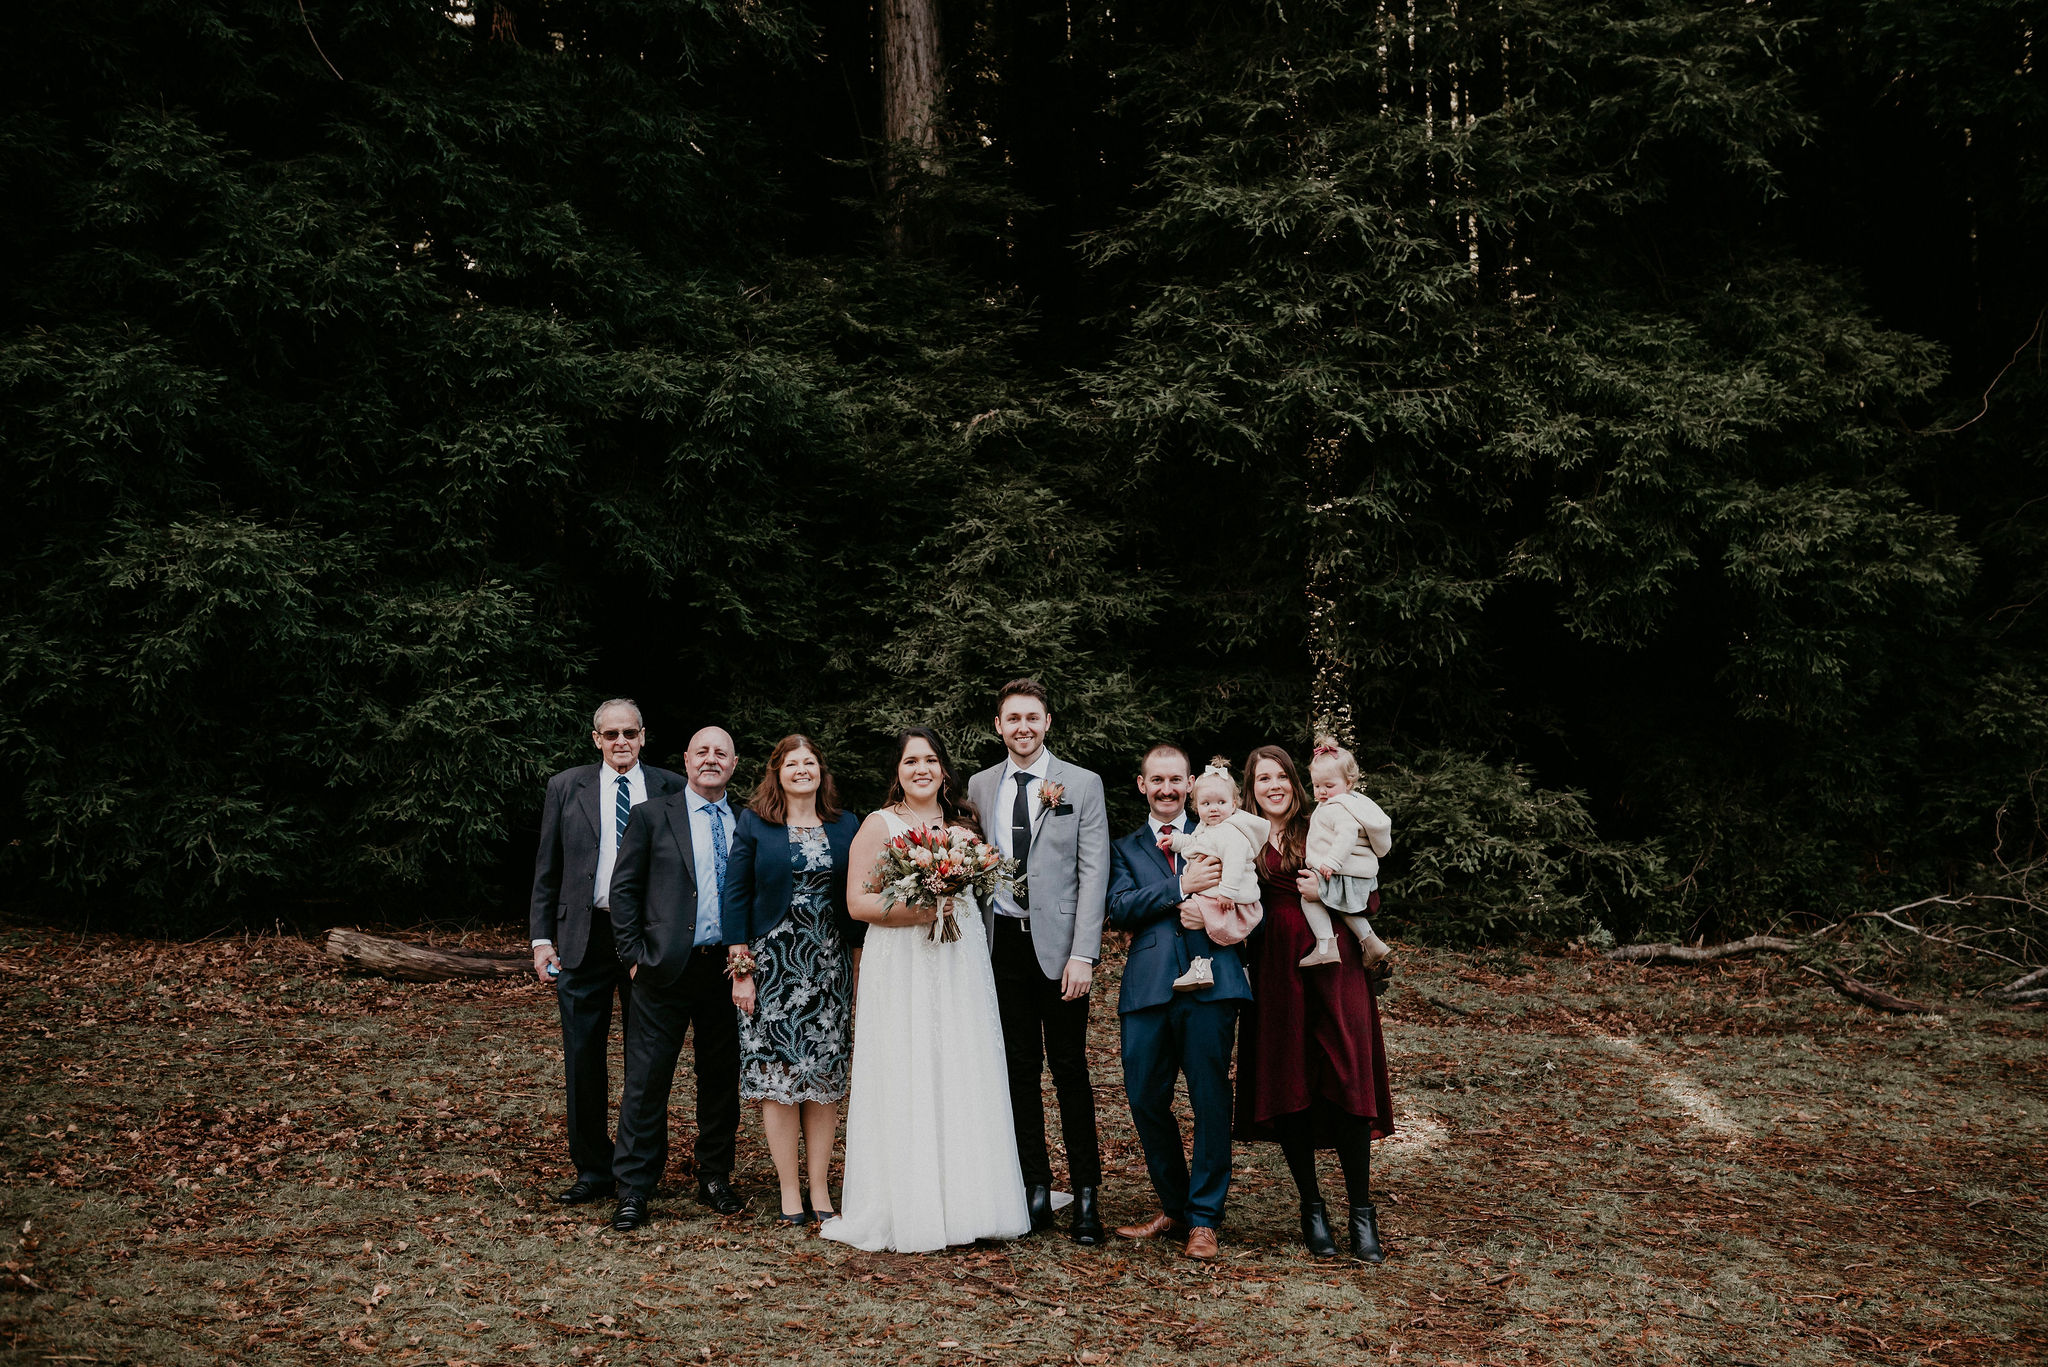 Lets-Elope-Melbourne-Celebrant-Photographer-Elopement-Package-Victoria-Sarah-Matler-Photography-Videography-Video-Warburton-Redwood-Forest-weddings-intimate-11